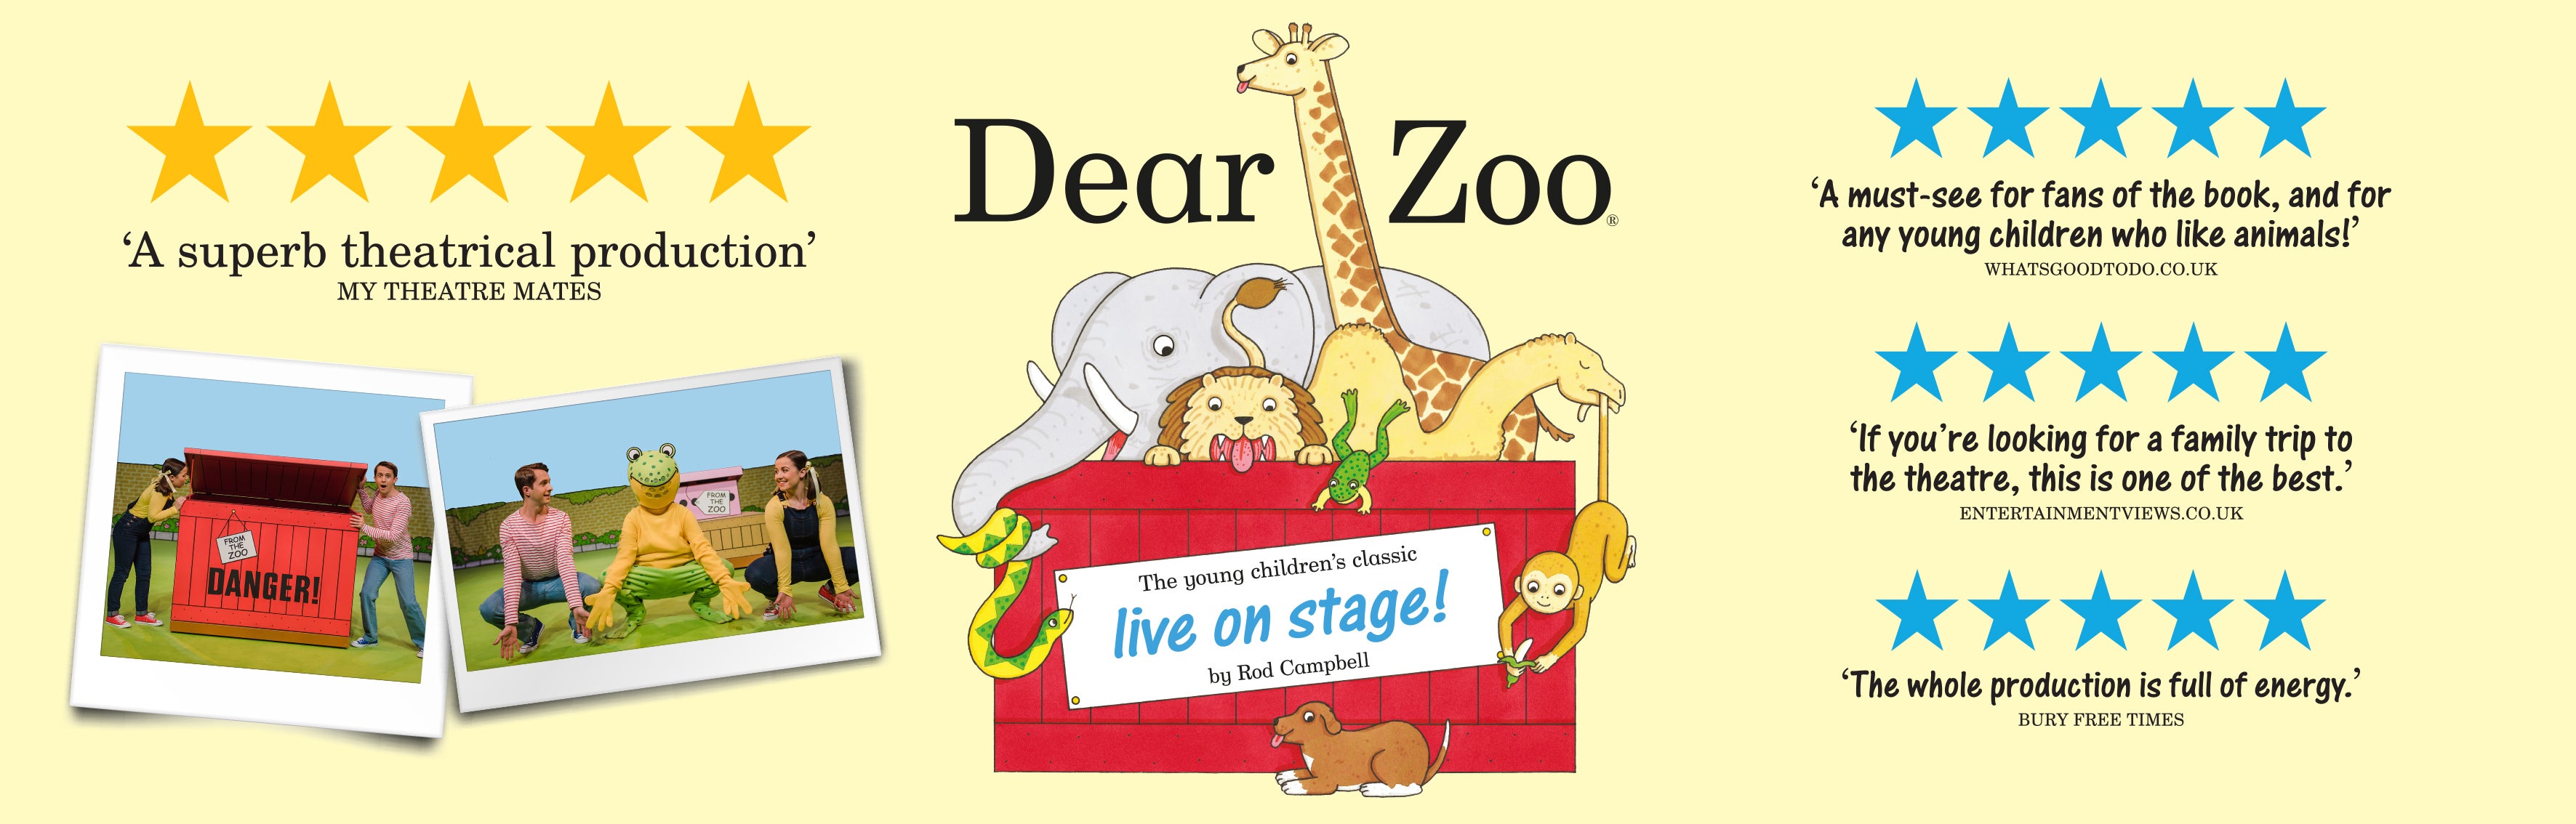 Dear Zoo Live on Stage Banner - 'A superb theatrical production' Quote by My Theatre Mates